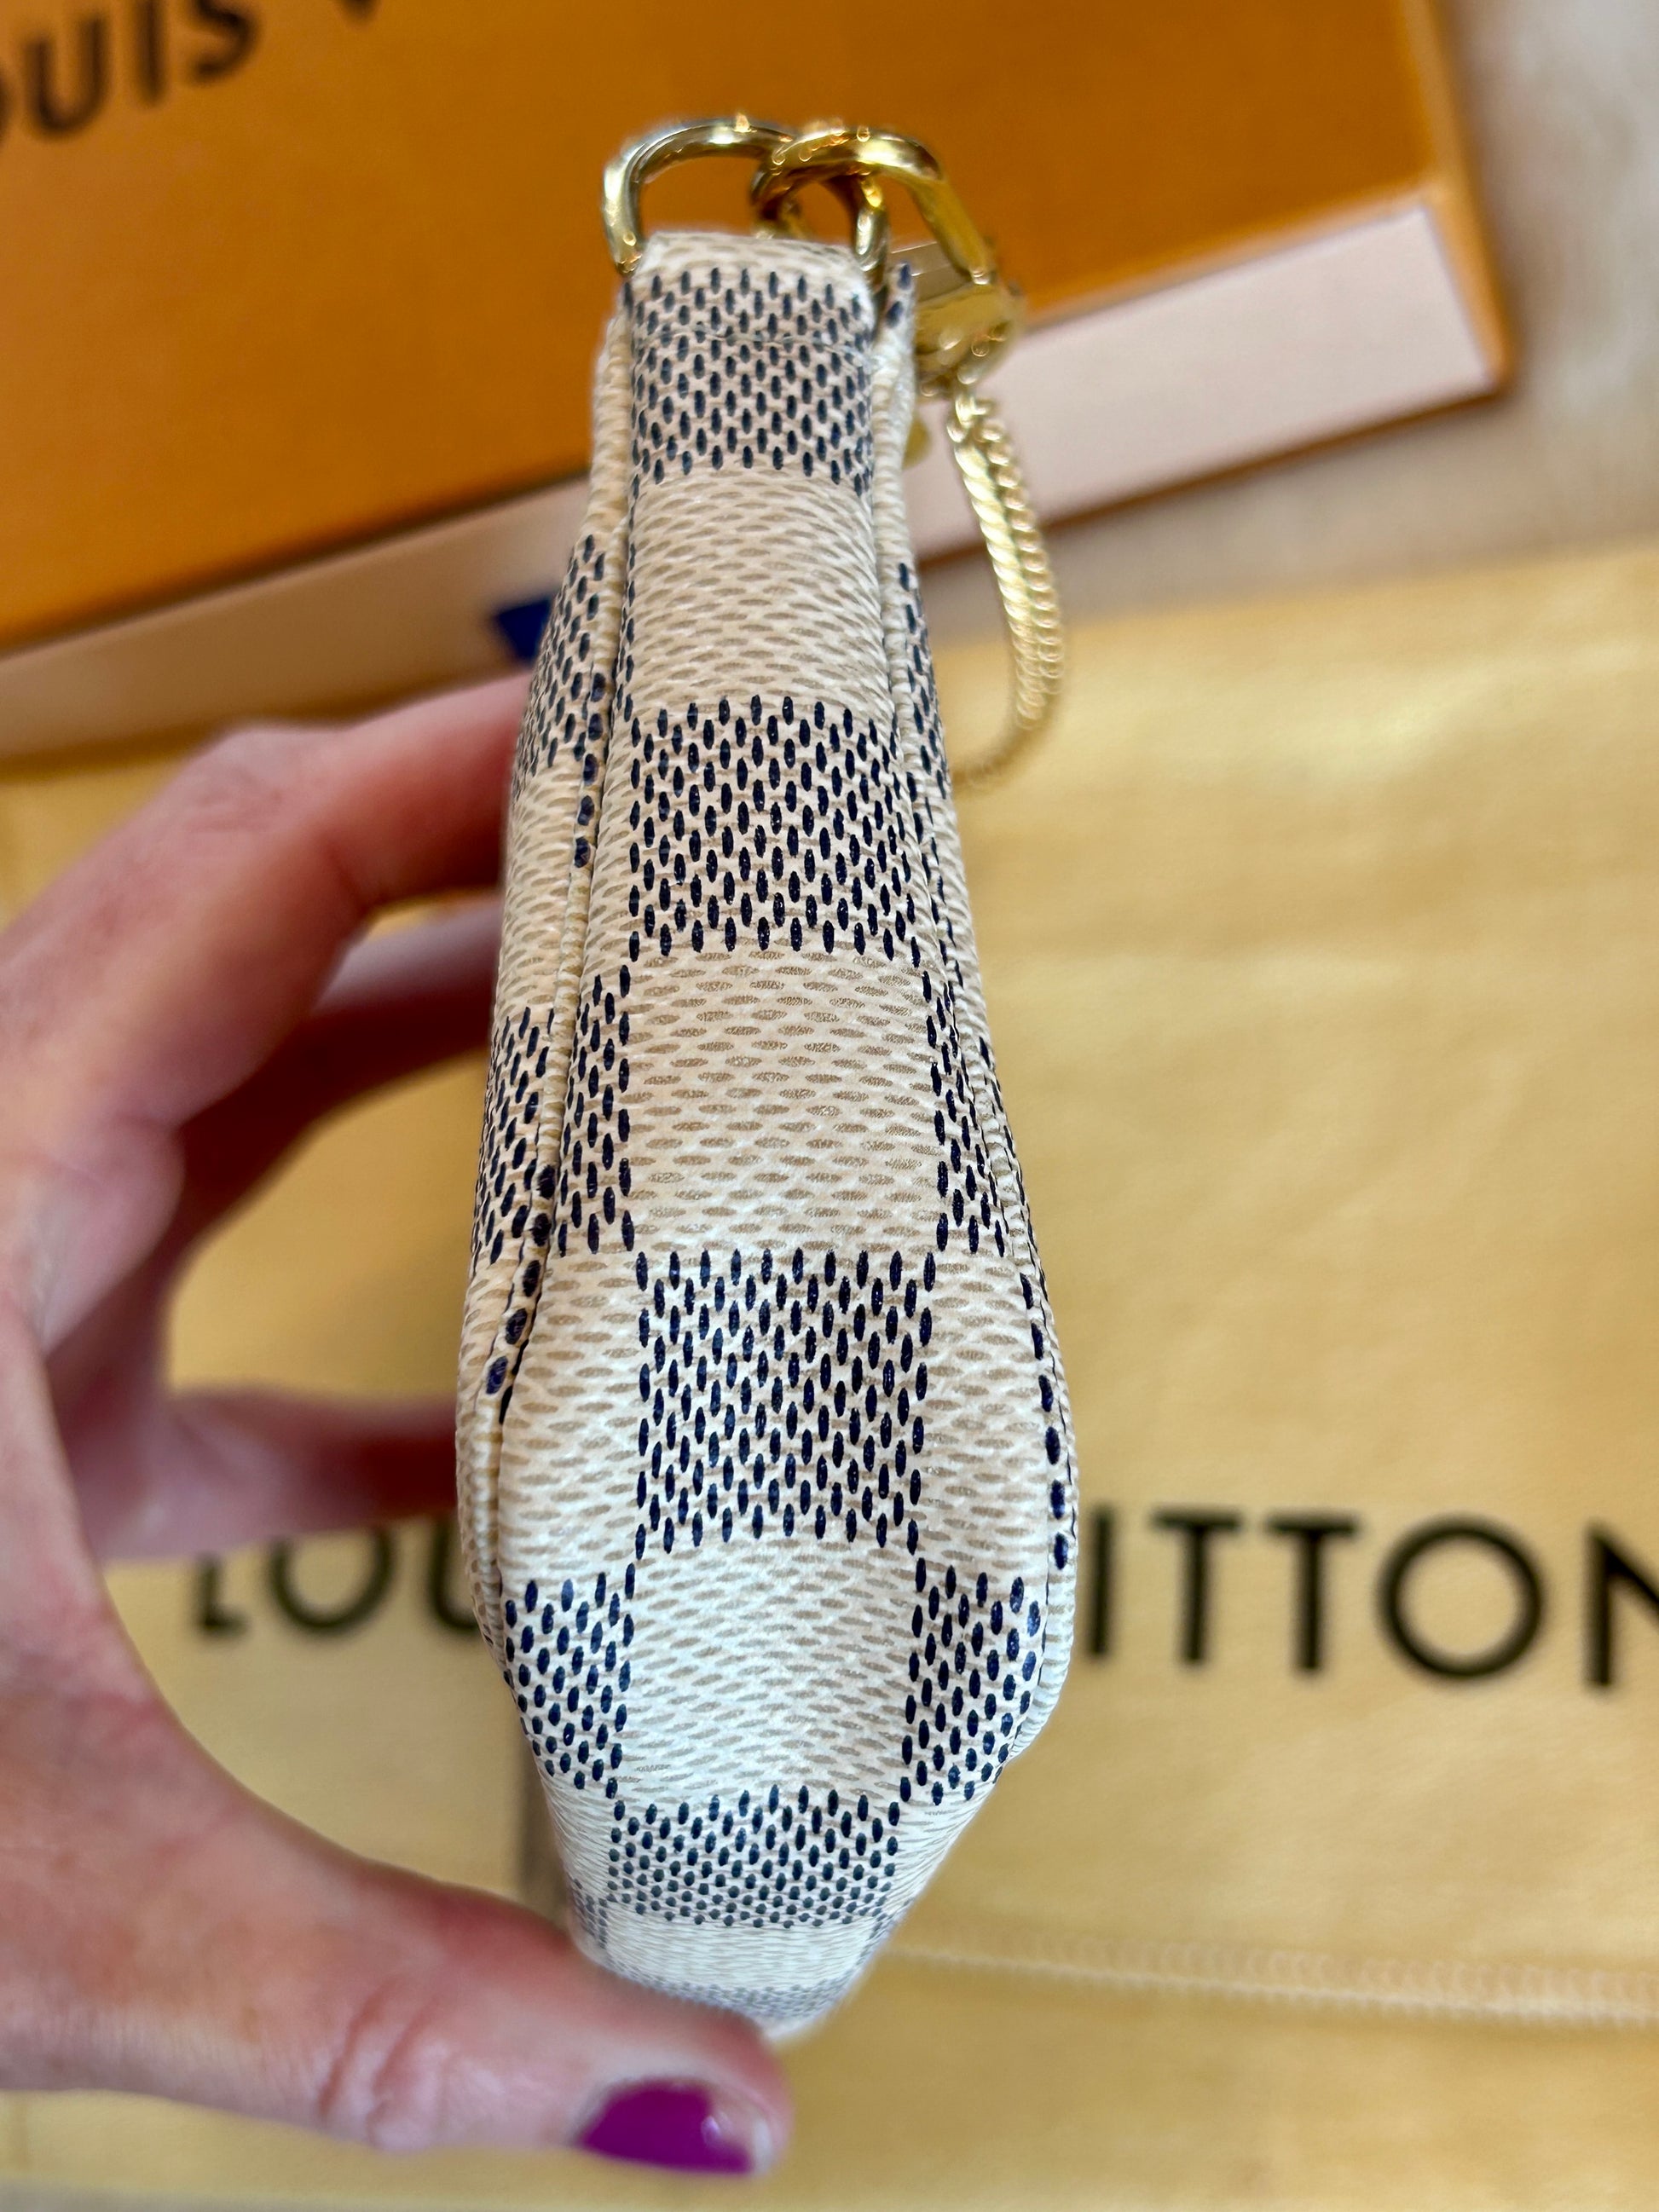 Louis Vuitton Key Pouch Damier Azur White/Blue in Canvas with Brass